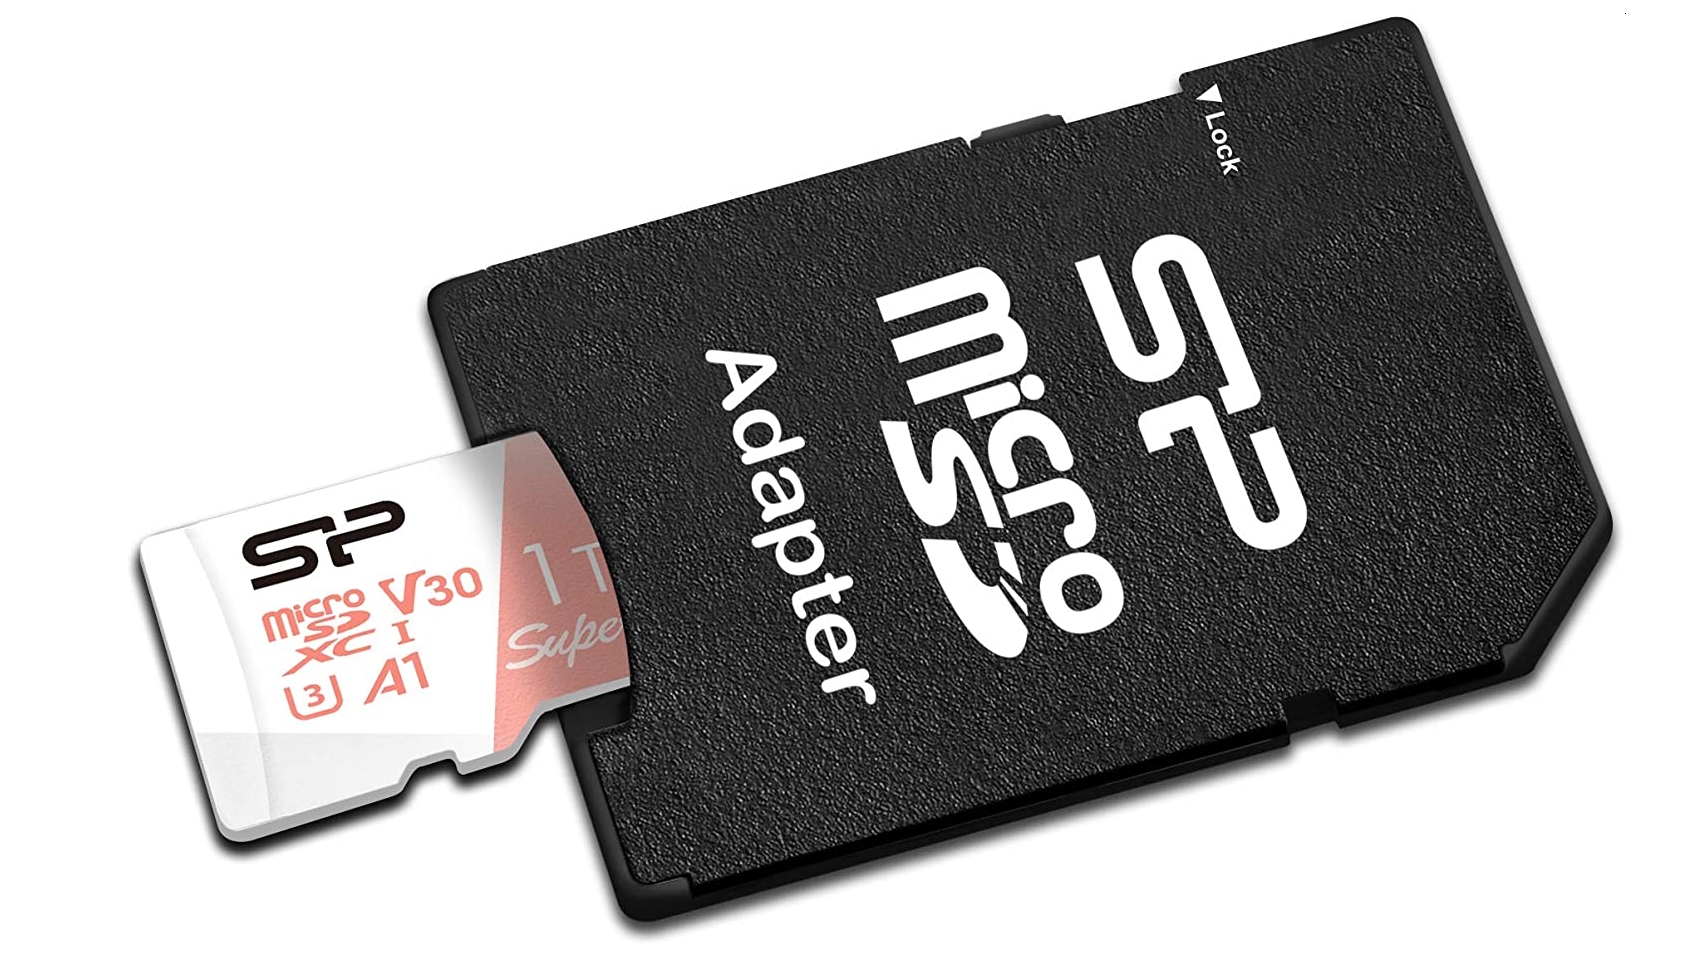 The cheapest 1TB microSD card has just launched with a surprising freebie